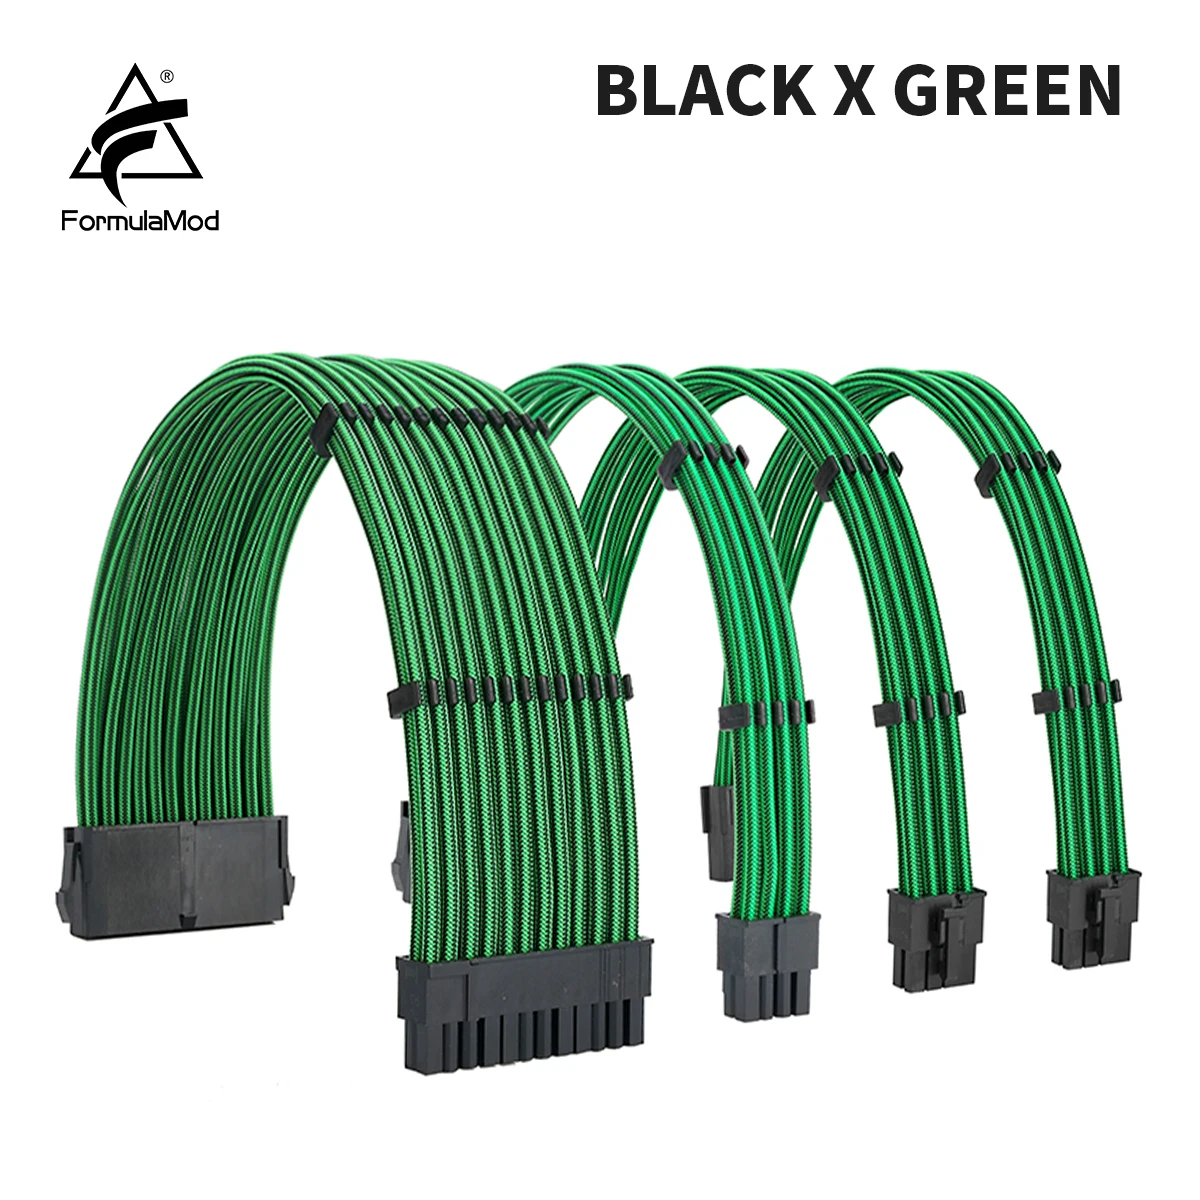 FormulaMod NCK1 Series PSU Extension Cable Kit , Mix Color Cable Solid Combo 300mm ATX24Pin PCI-E8Pin CPU8Pin With Combs  